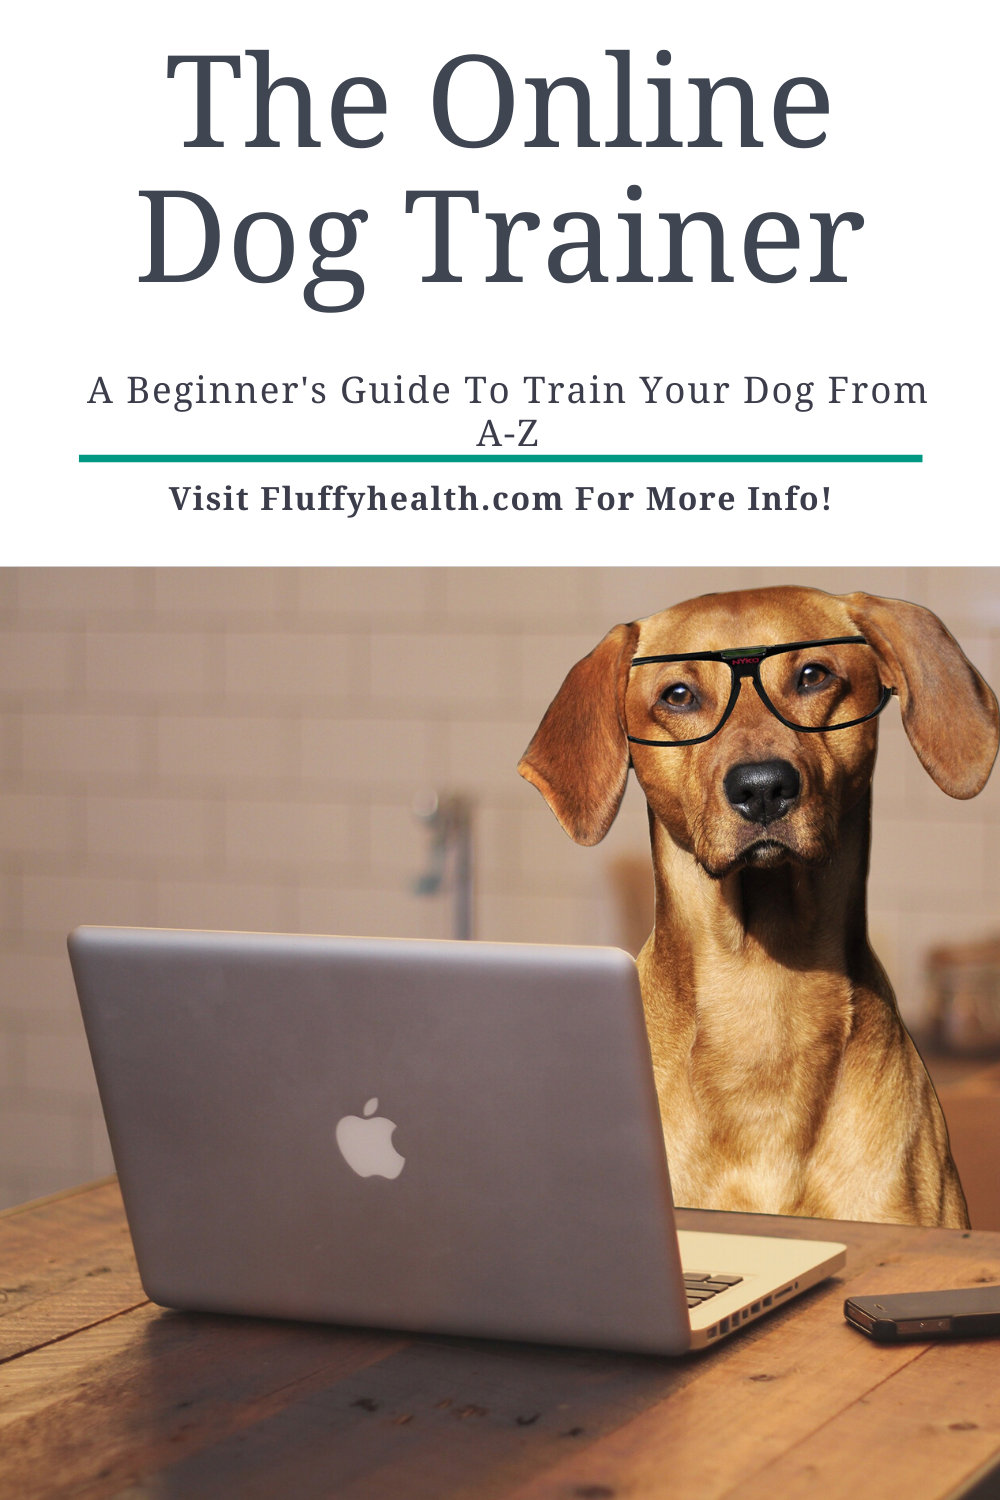 Doggy Dans Online Dog Trainer Reviews Is It A Scam Or